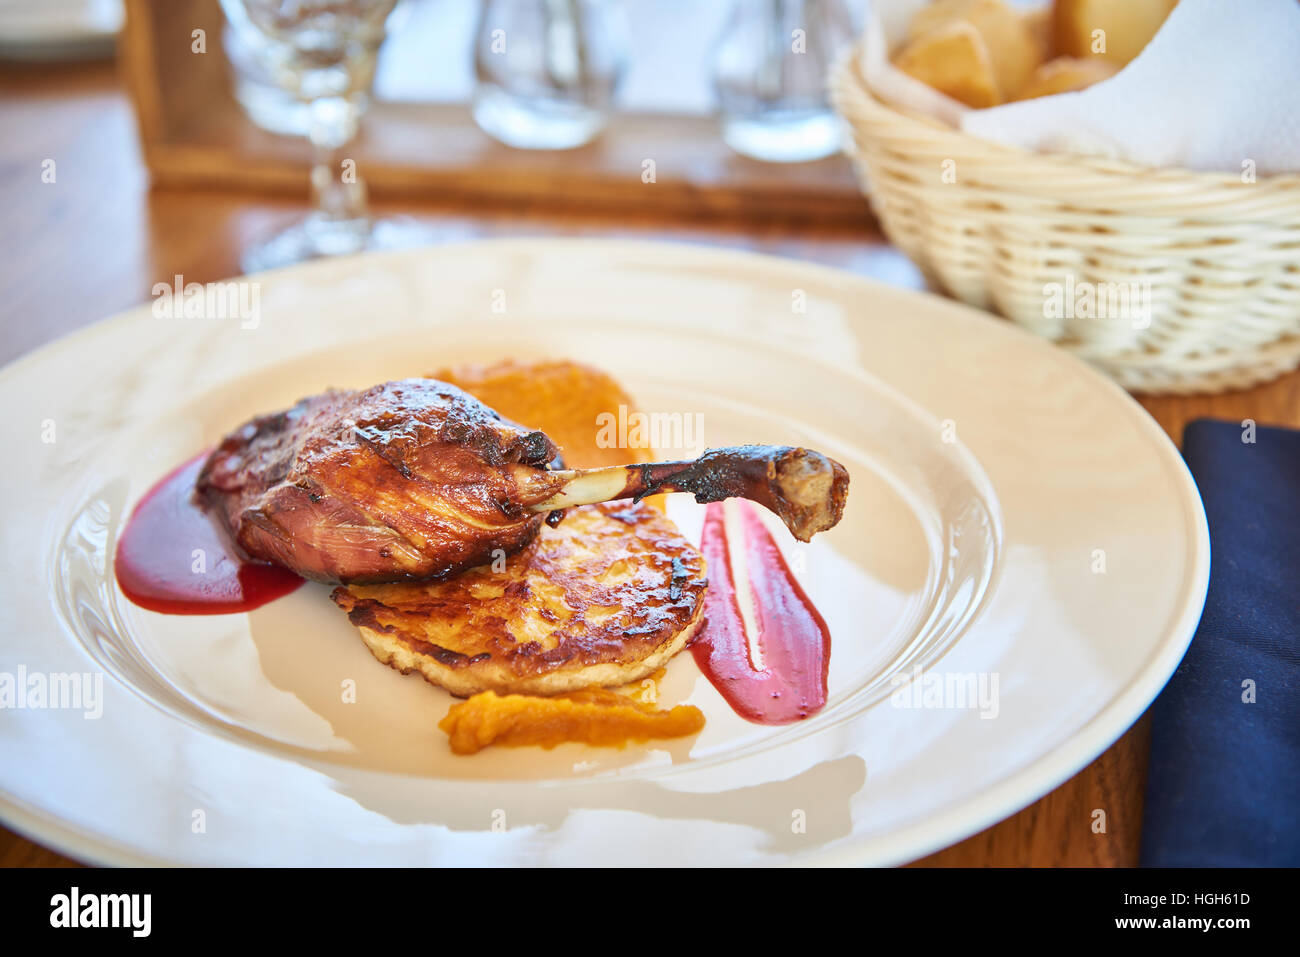 Roasted duck thigh with vegetable cutlet with sauce Stock Photo